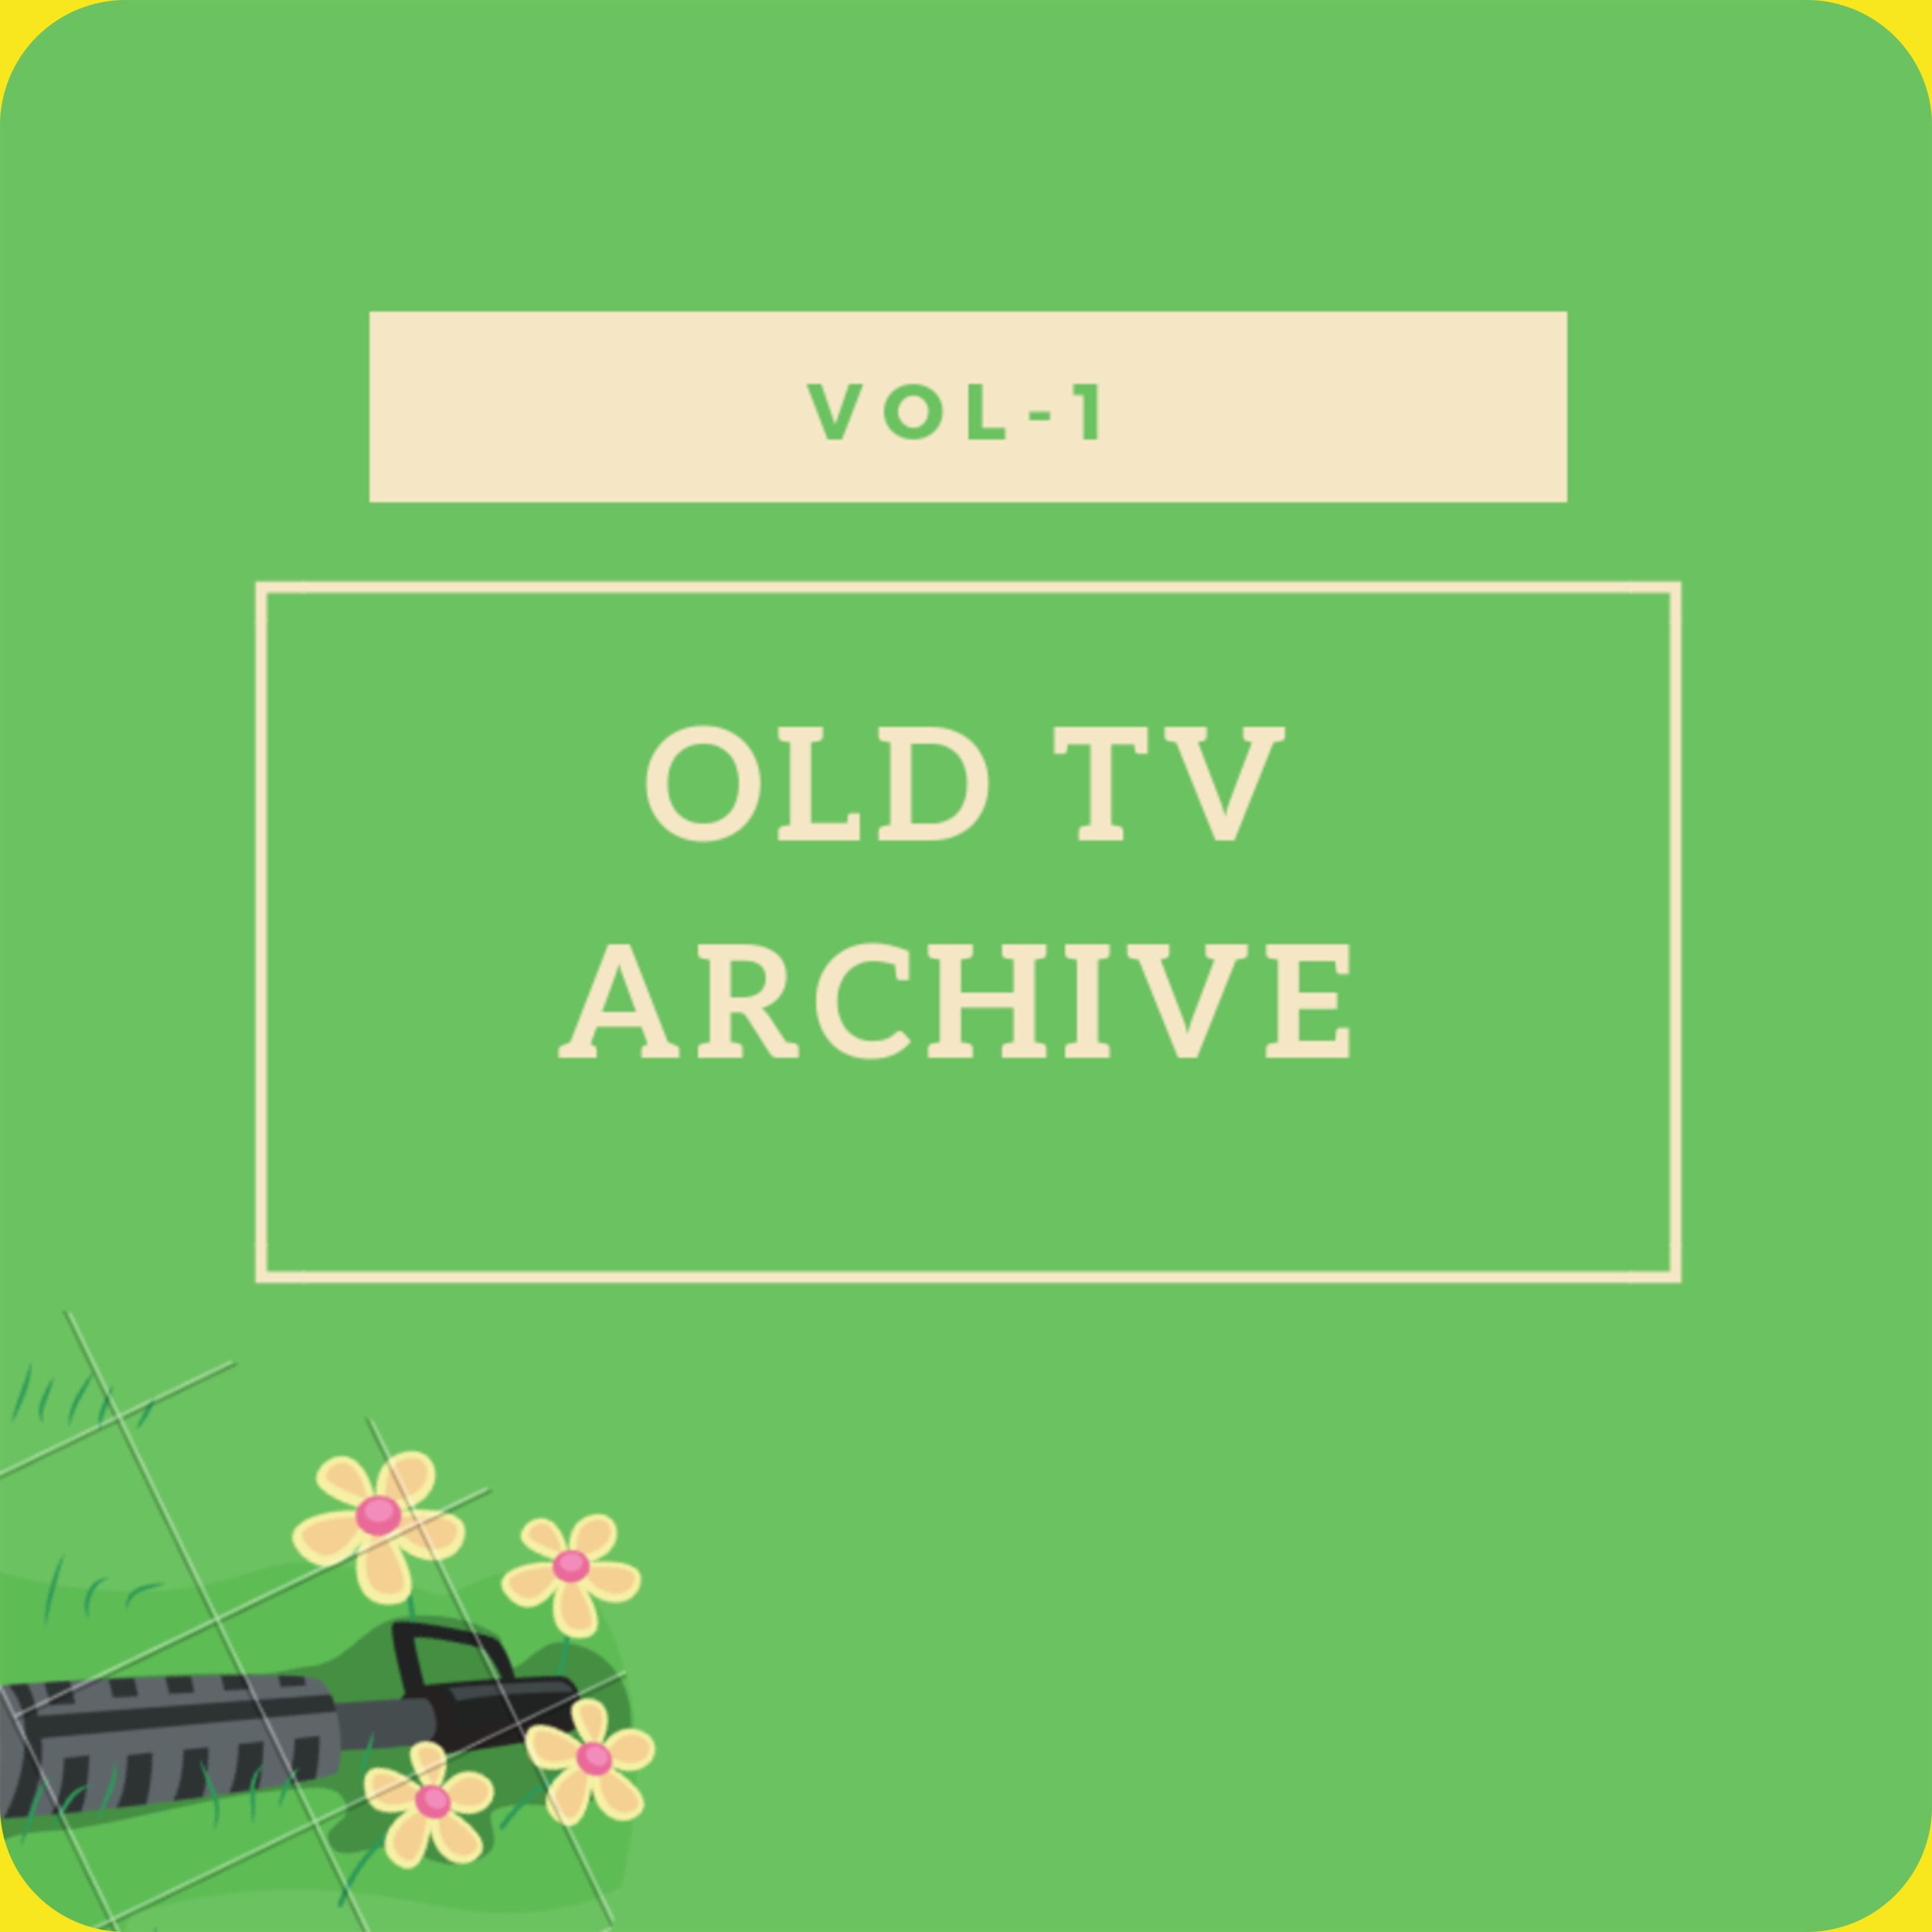 Old TV Archive Vol-1 (Record)